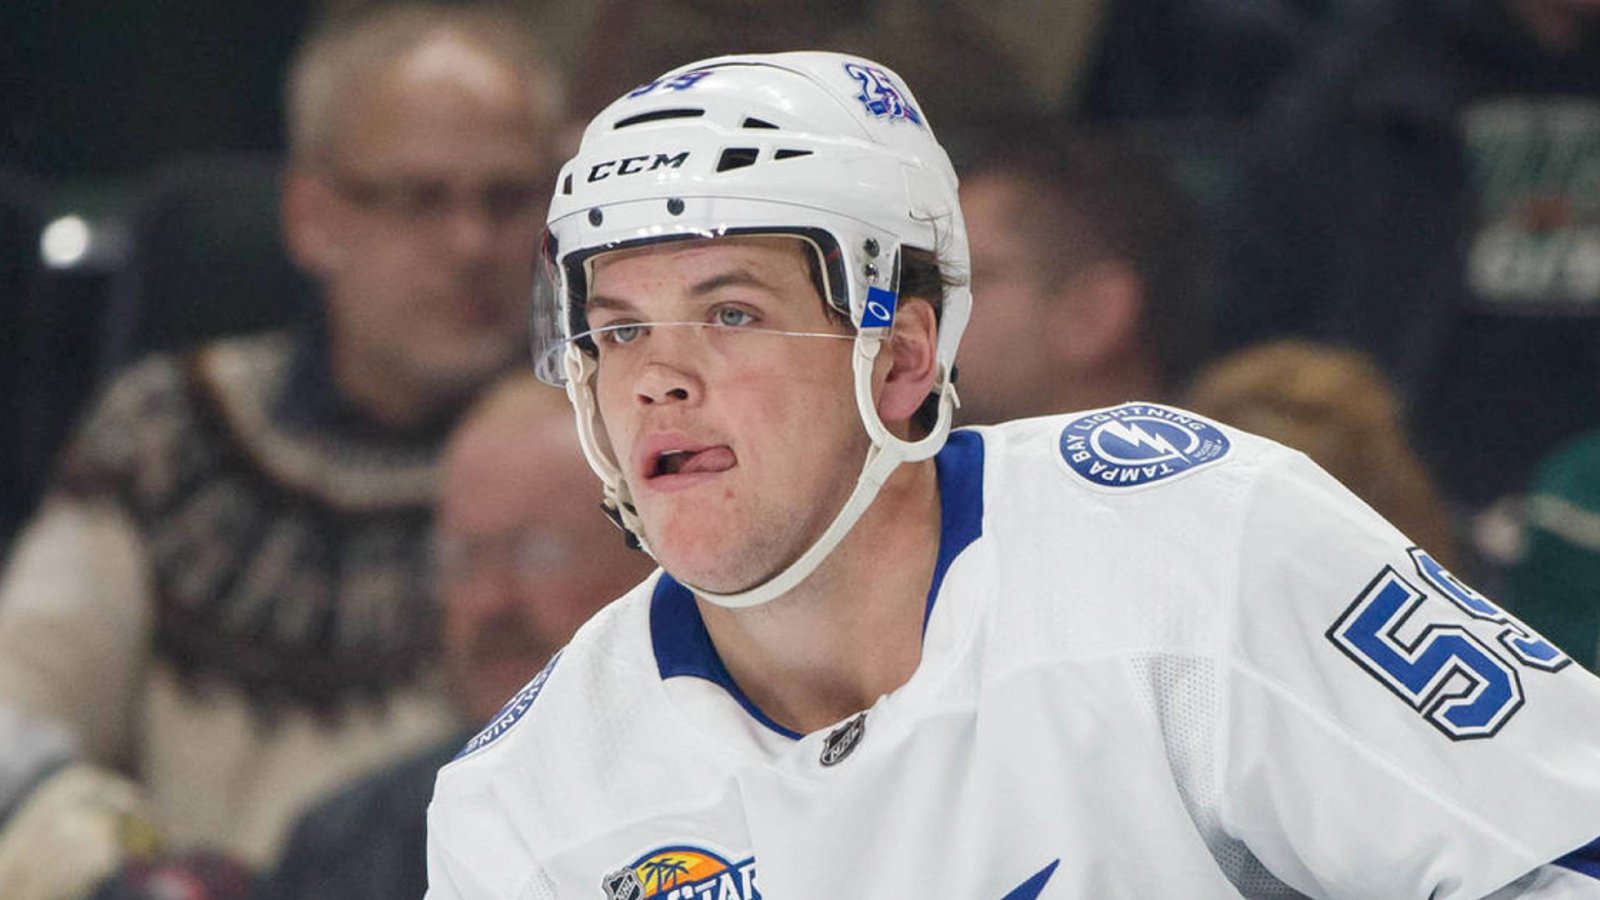 Breaking: Lightning and Dotchin reach settlement on terminated contract